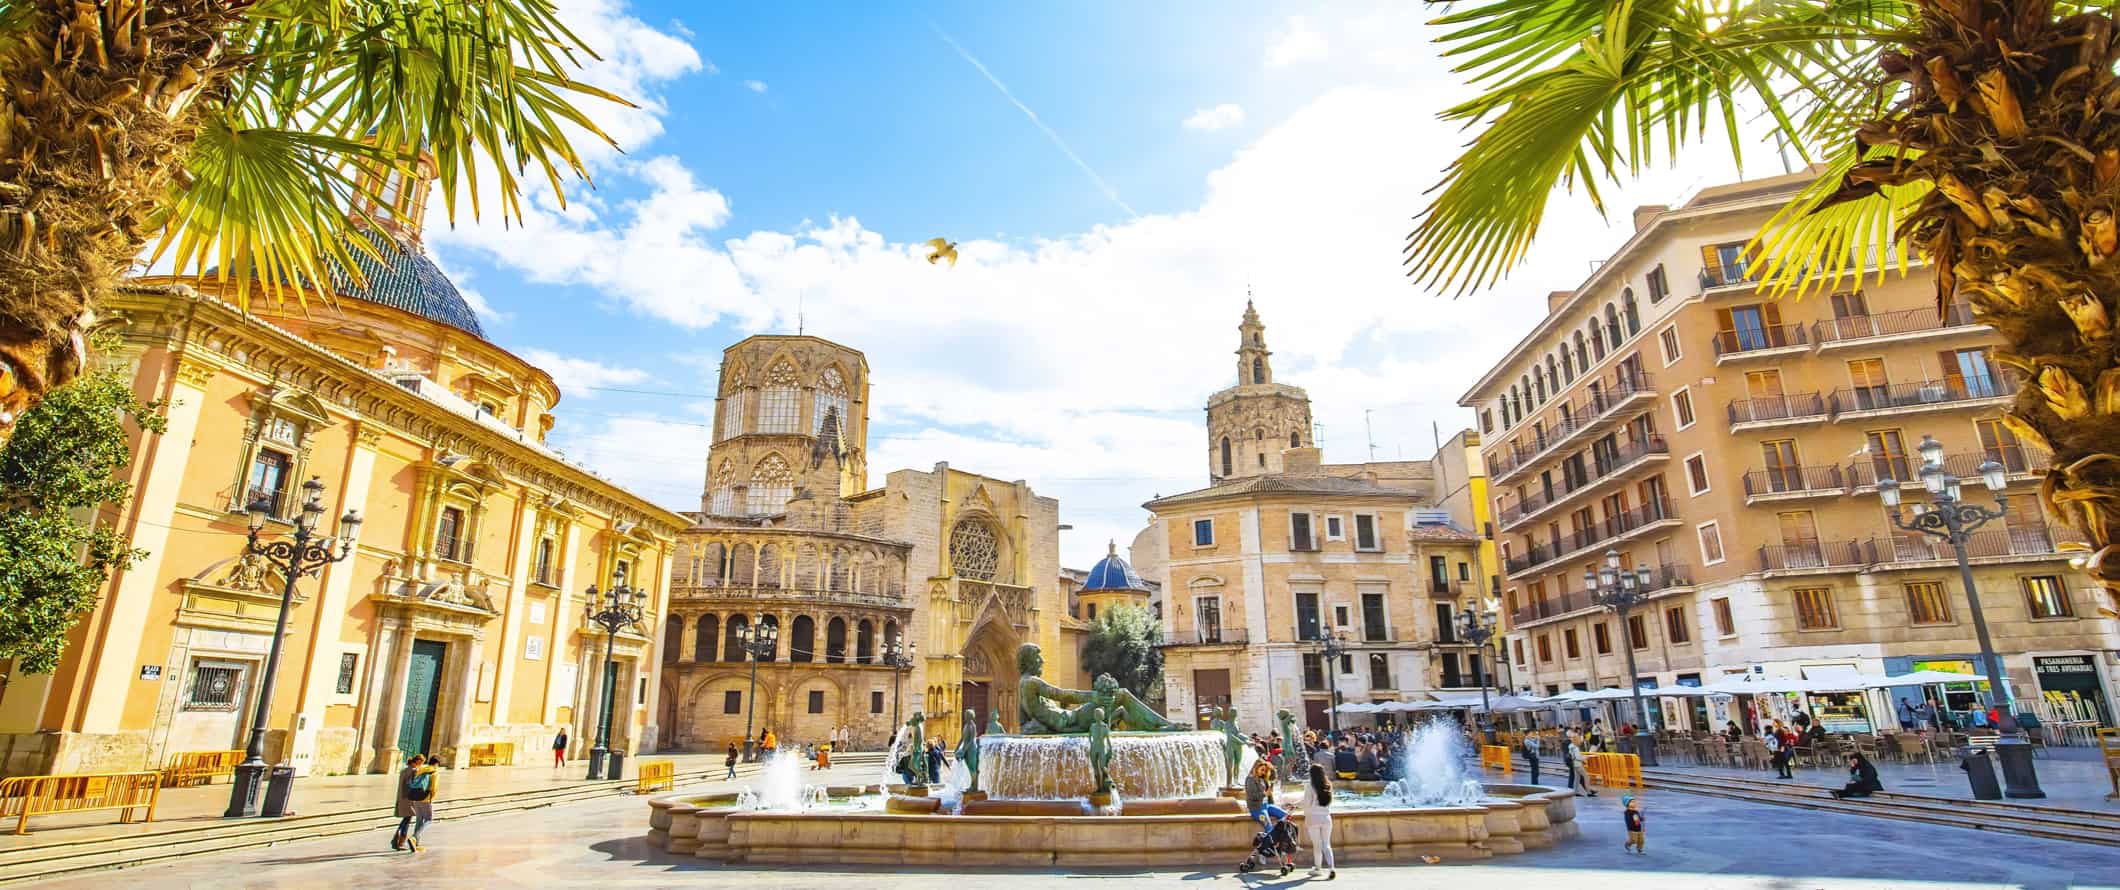 A relaxing street scene in sunny Valencia, Spain, featuring historic buildings and locals out for a stroll